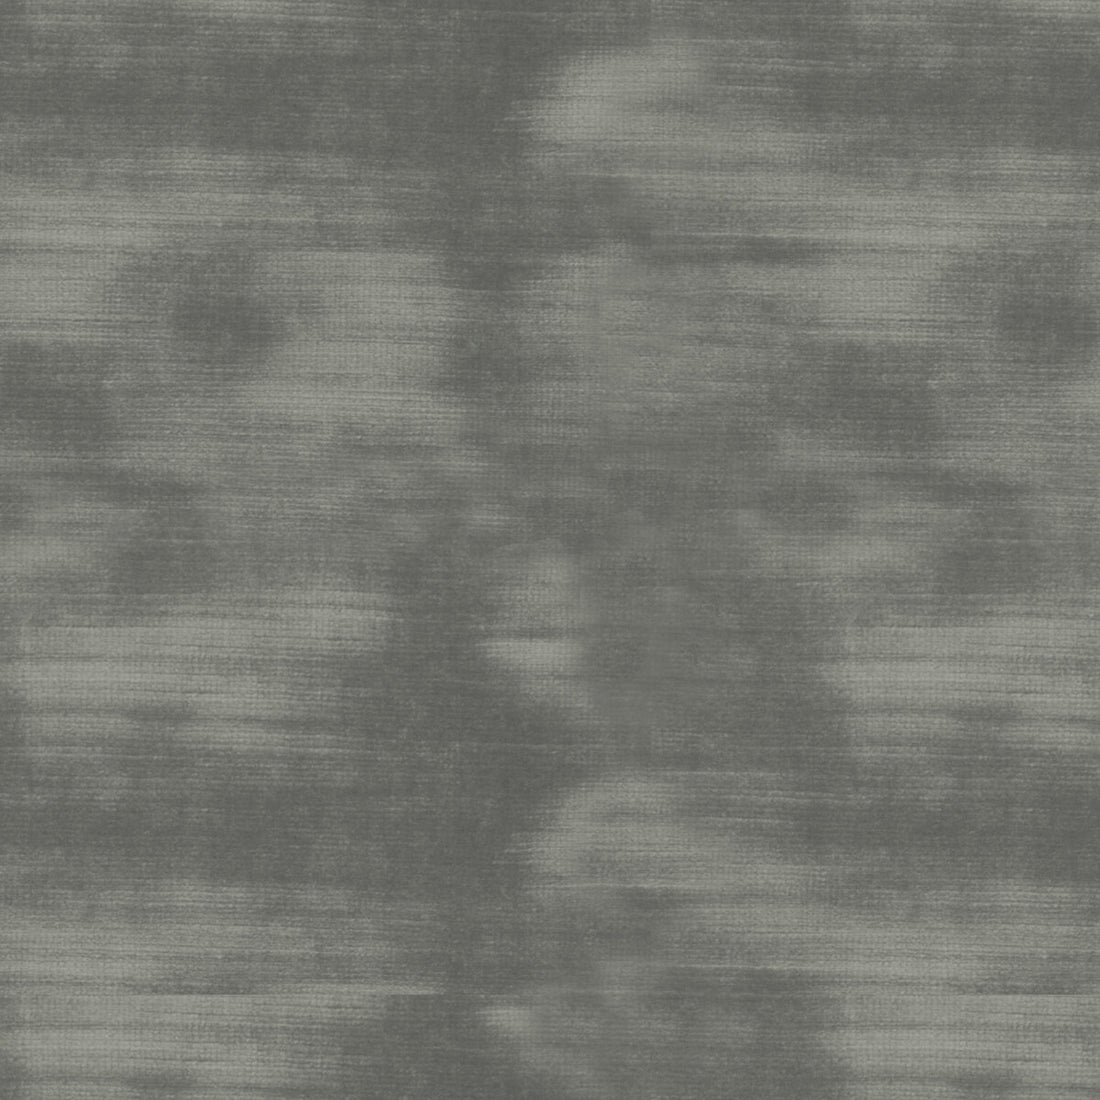 High Impact fabric in silver color - pattern 34329.11.0 - by Kravet Couture